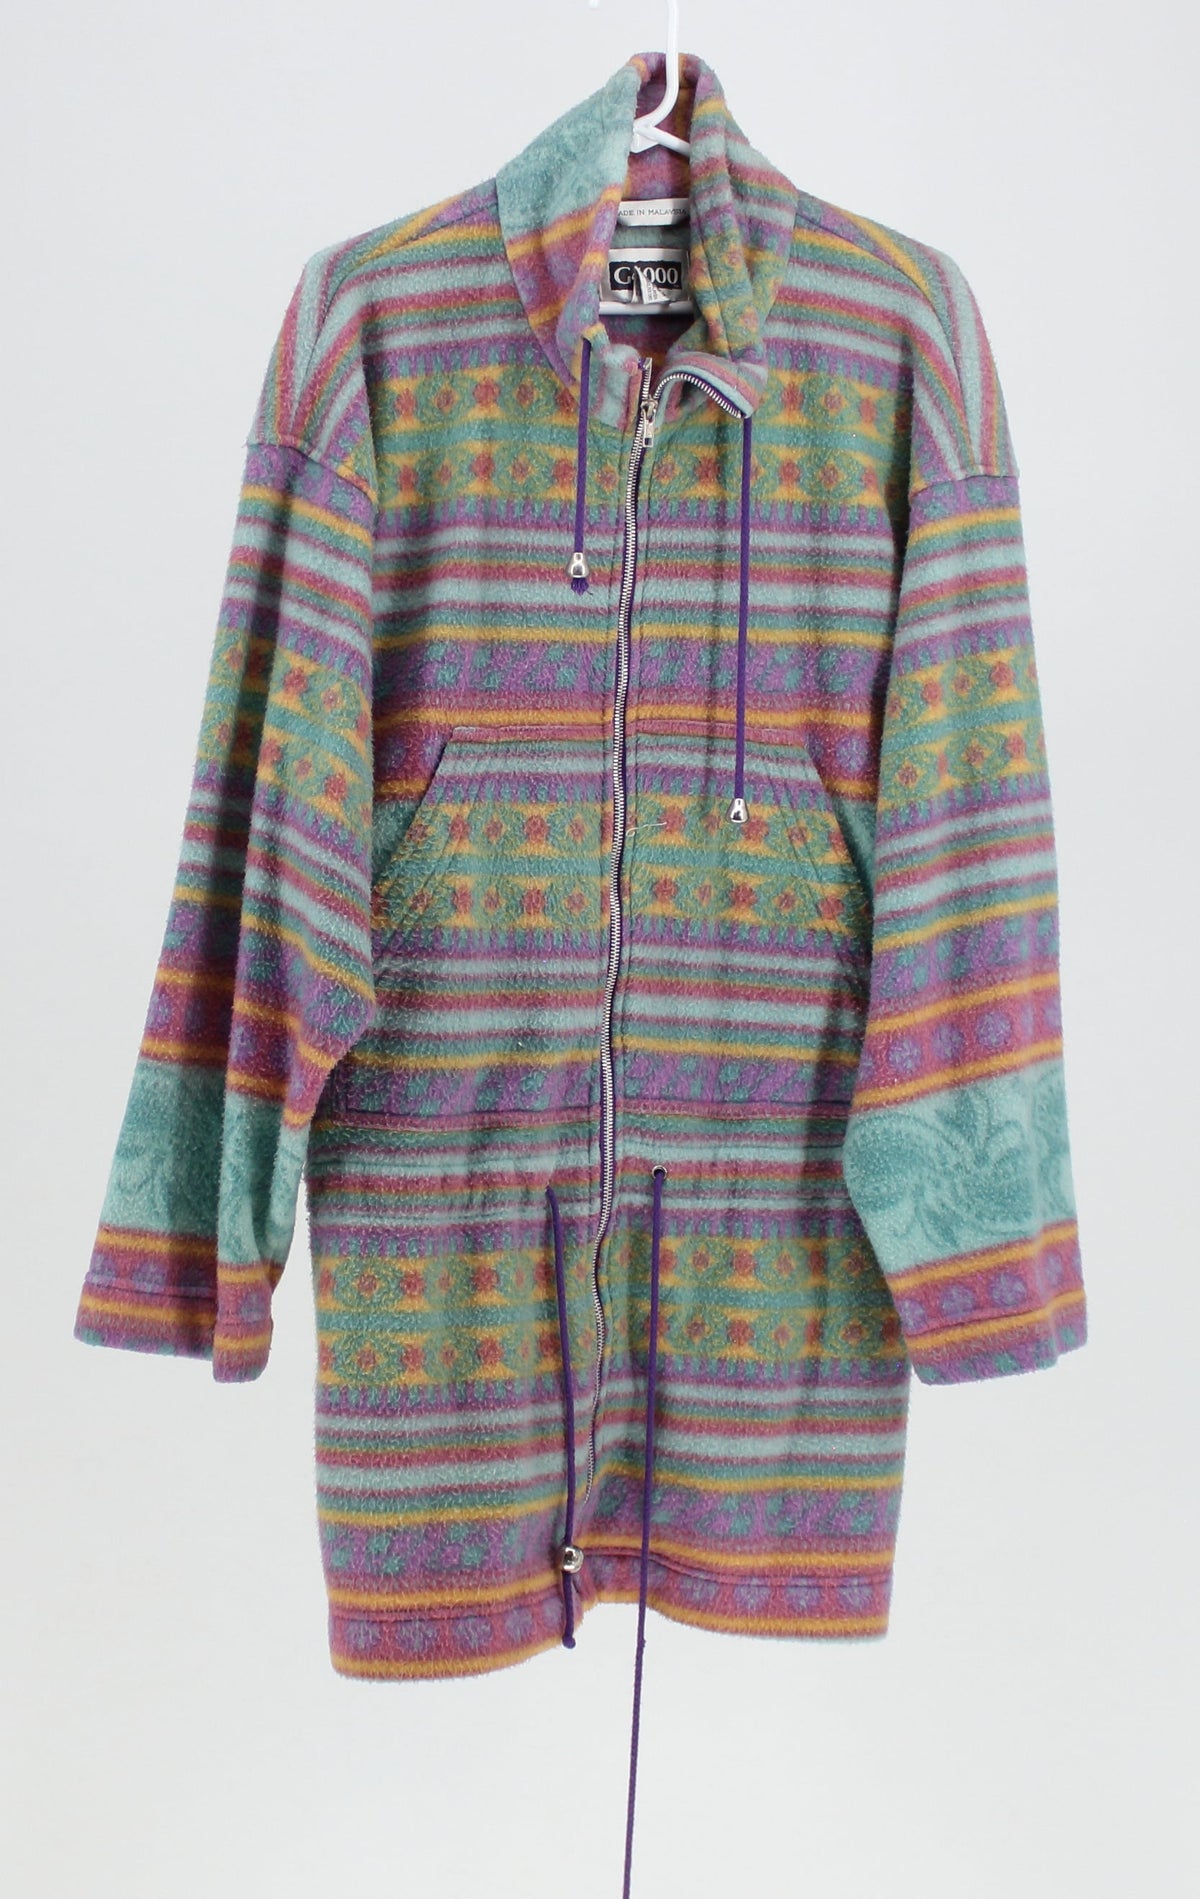 G4000 Multi Coloured and Patterned Fleece Zip-Up Sweater